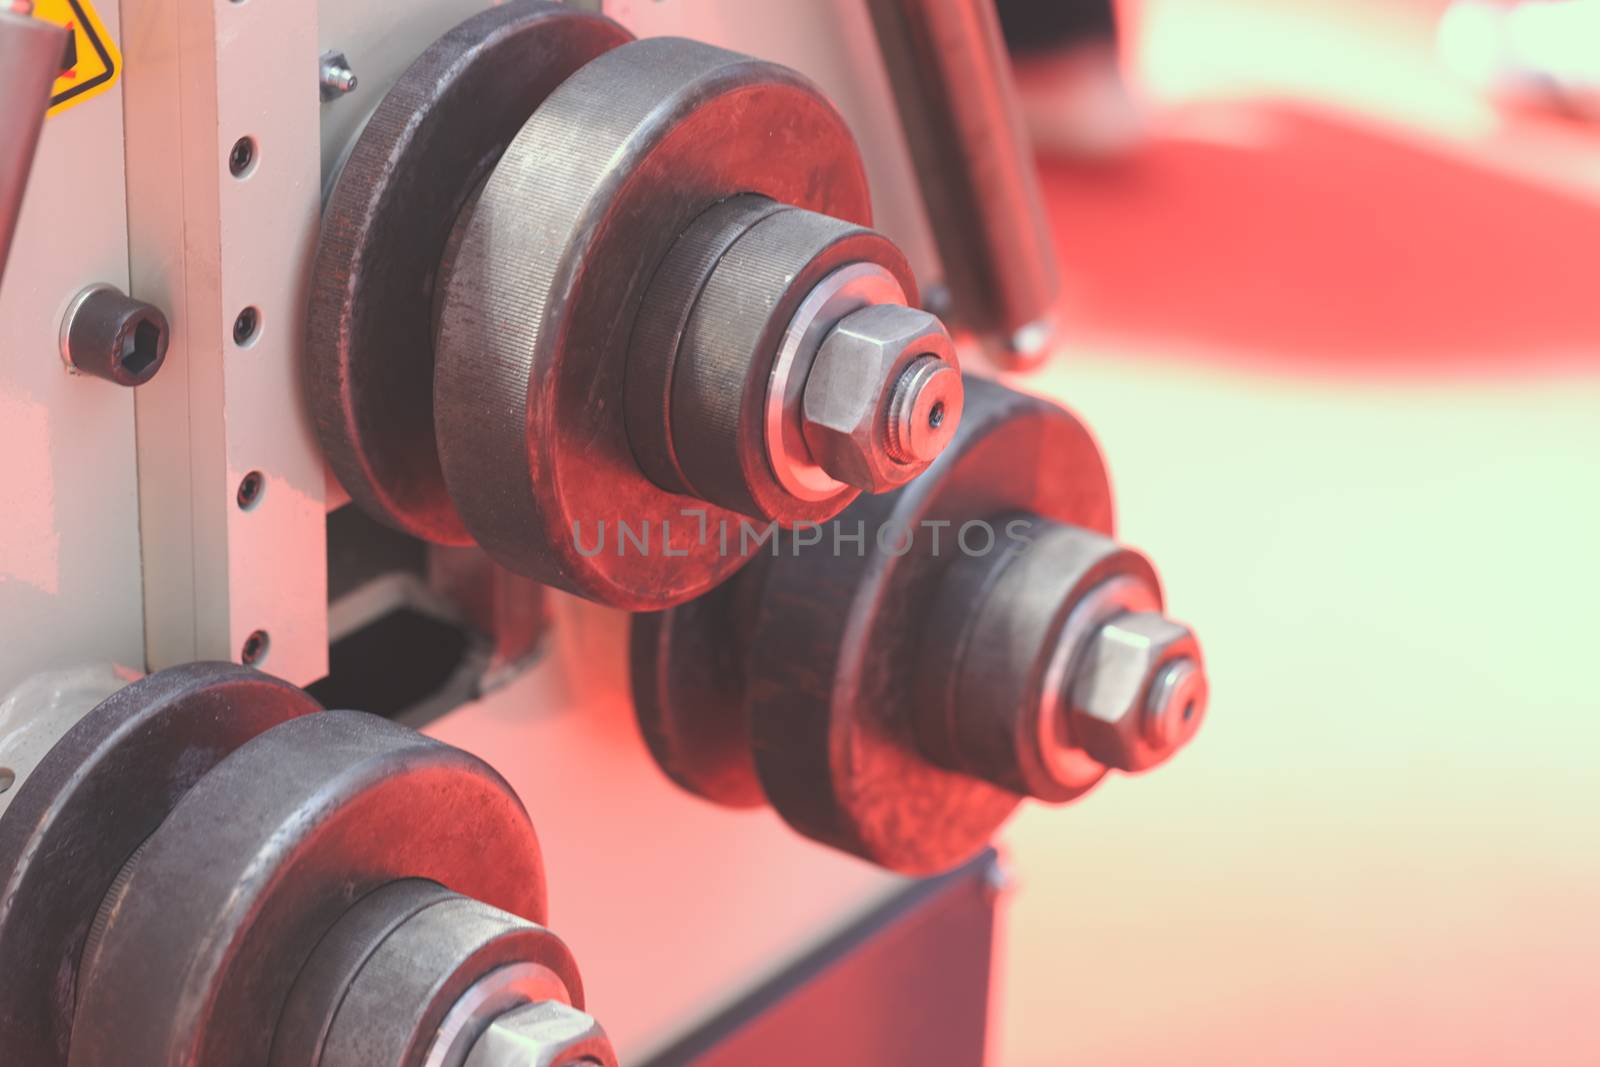 detail of metal processing machines , note shallow depth of field